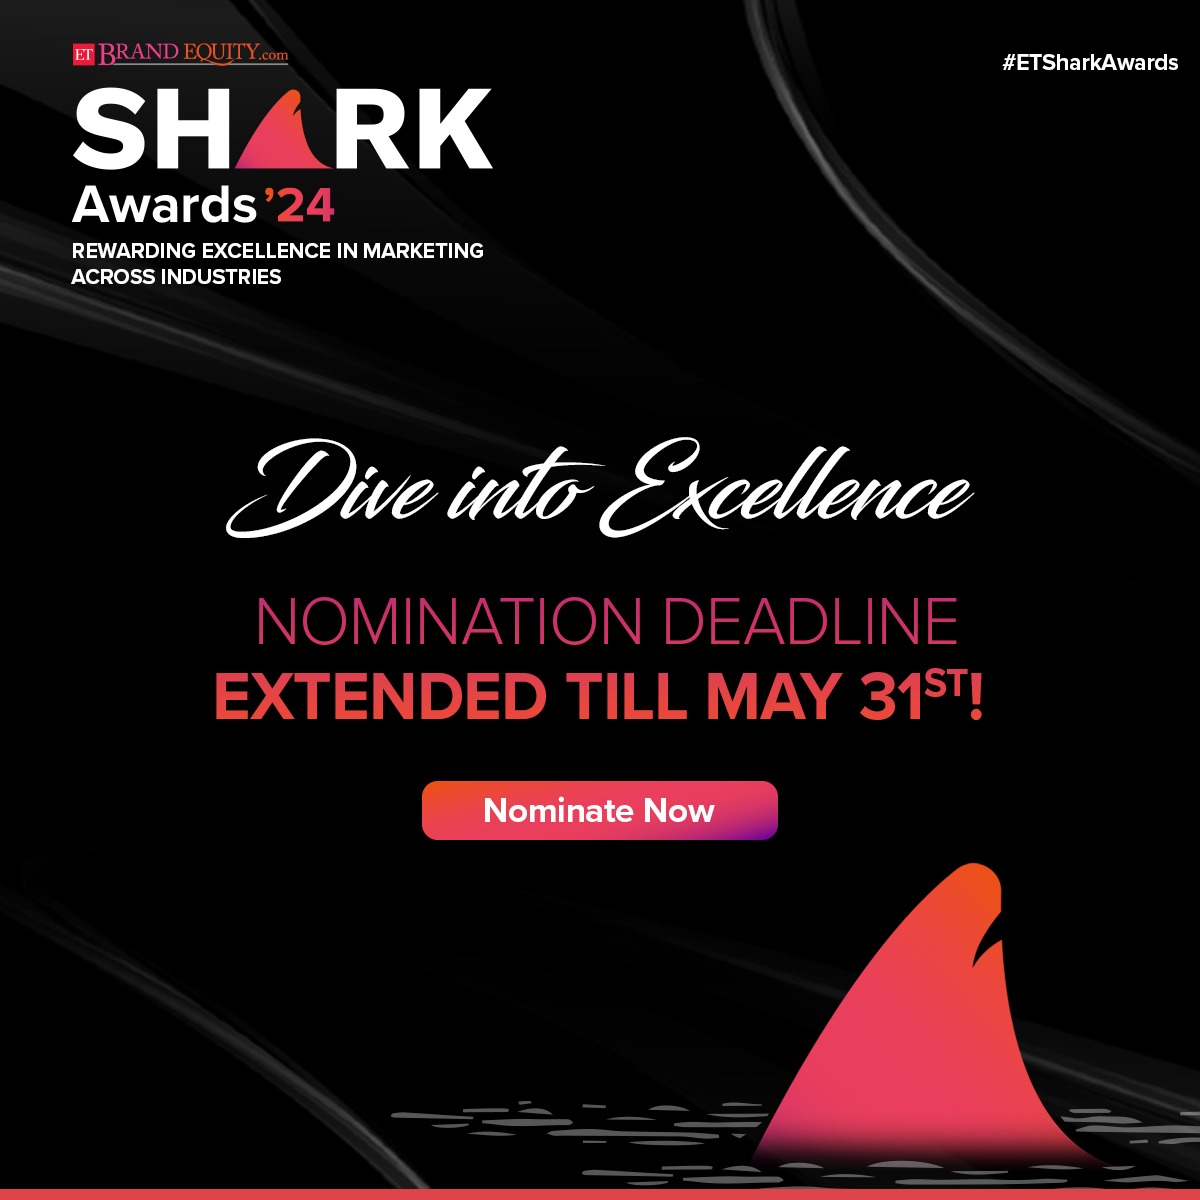 The nomination deadline for #ETSharkAwards has been extended to May 31st!🌟Don't miss out on your chance to shine – submit your entries now and showcase your brilliance!

Link:  bit.ly/4ag0dXQ

#MarketingExcellence #InnovationInMarketing #CreativityUnleashed #Digital